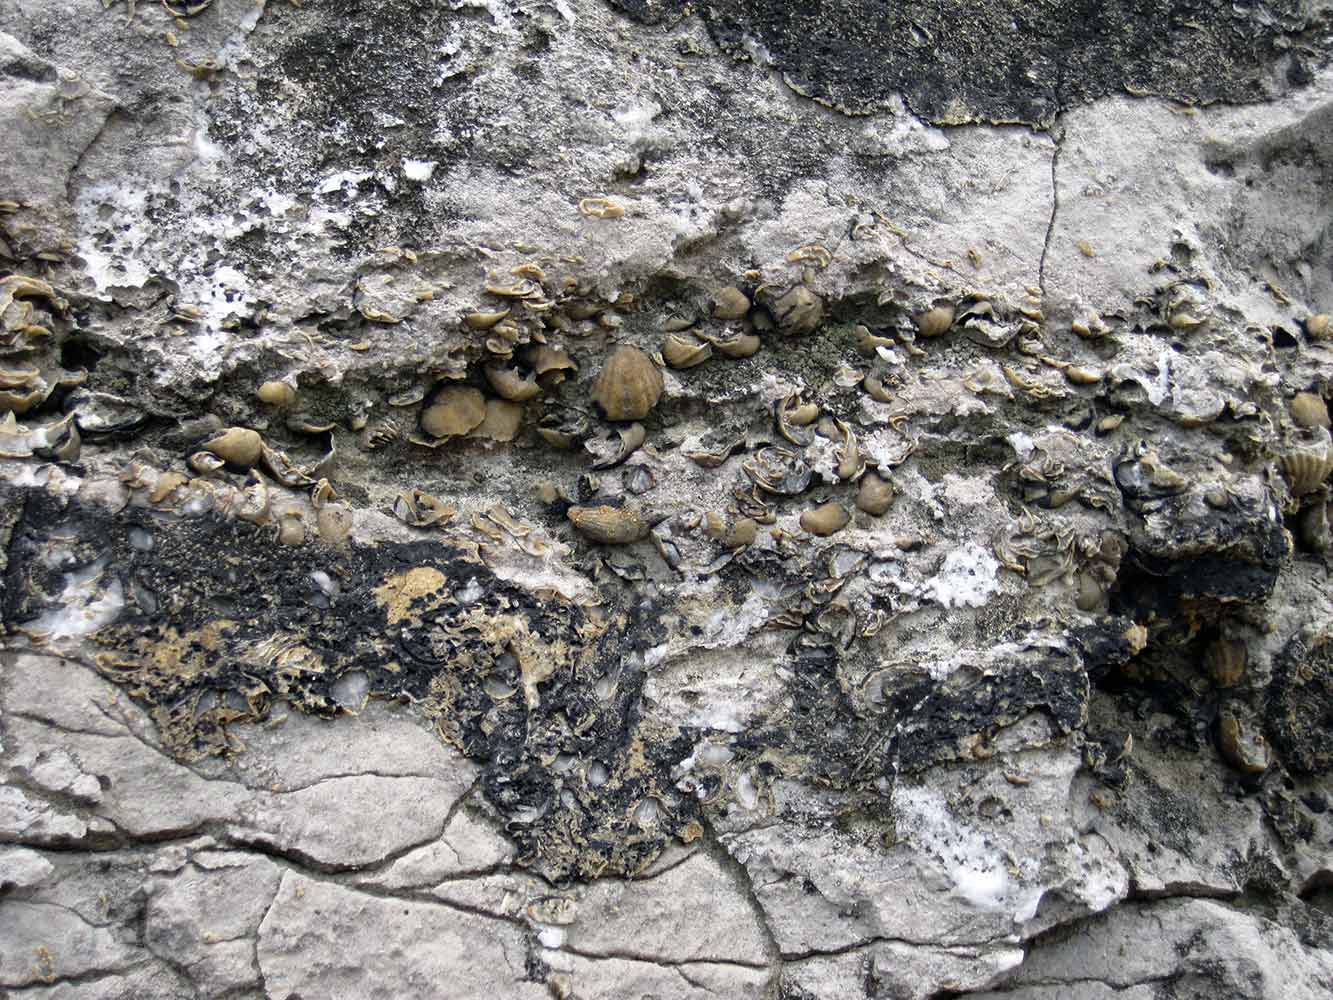 Fossils in a rock outcrop on dry land